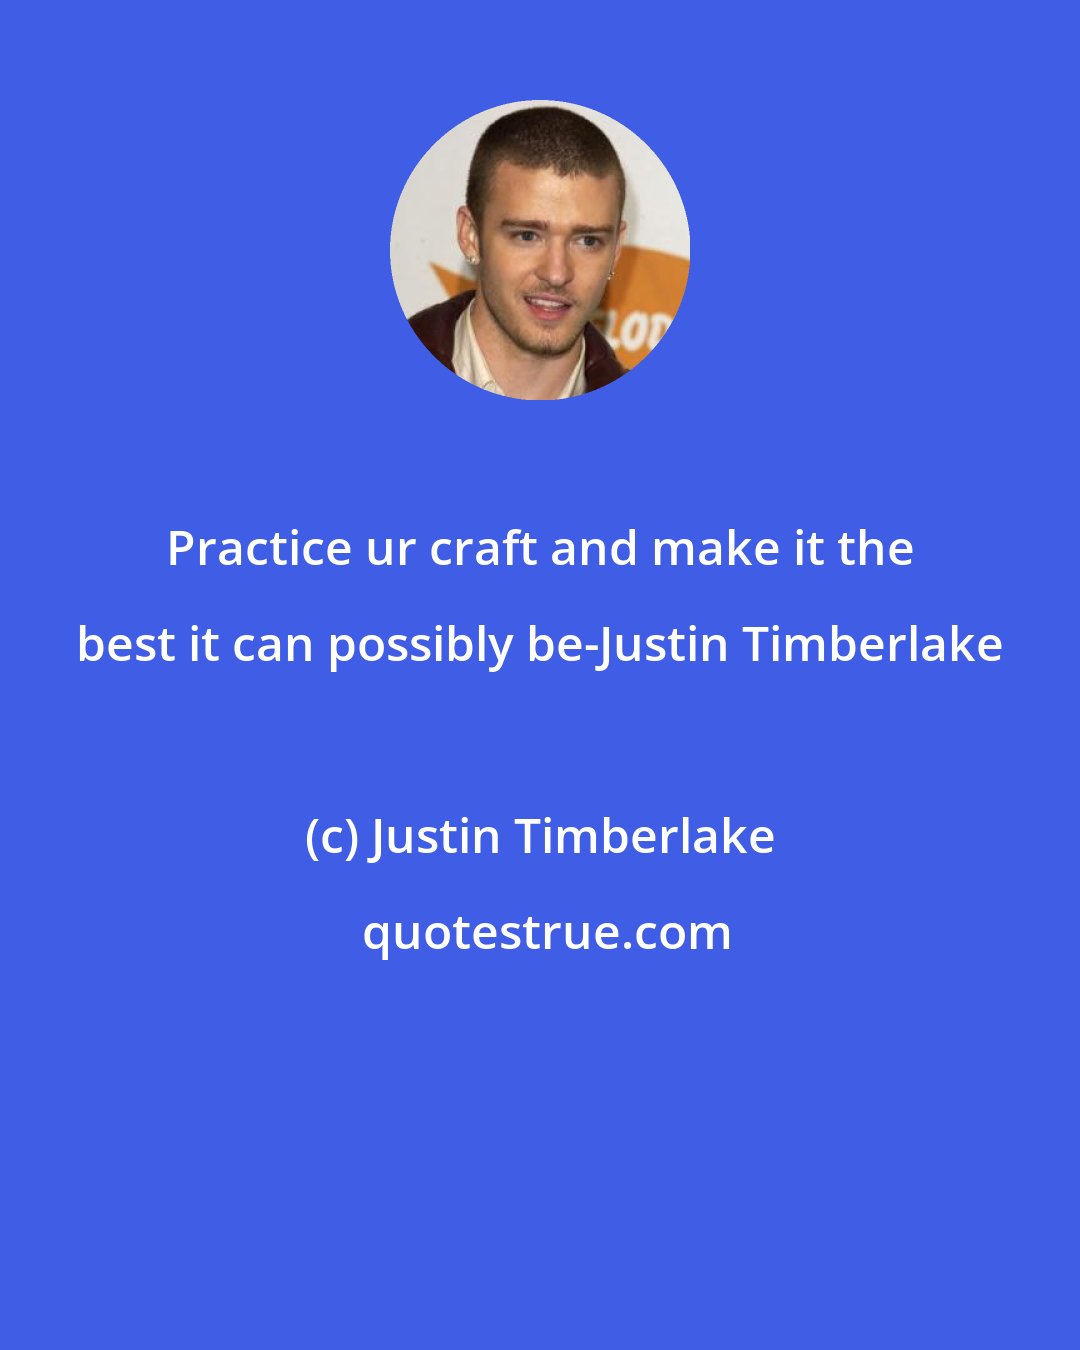 Justin Timberlake: Practice ur craft and make it the best it can possibly be-Justin Timberlake